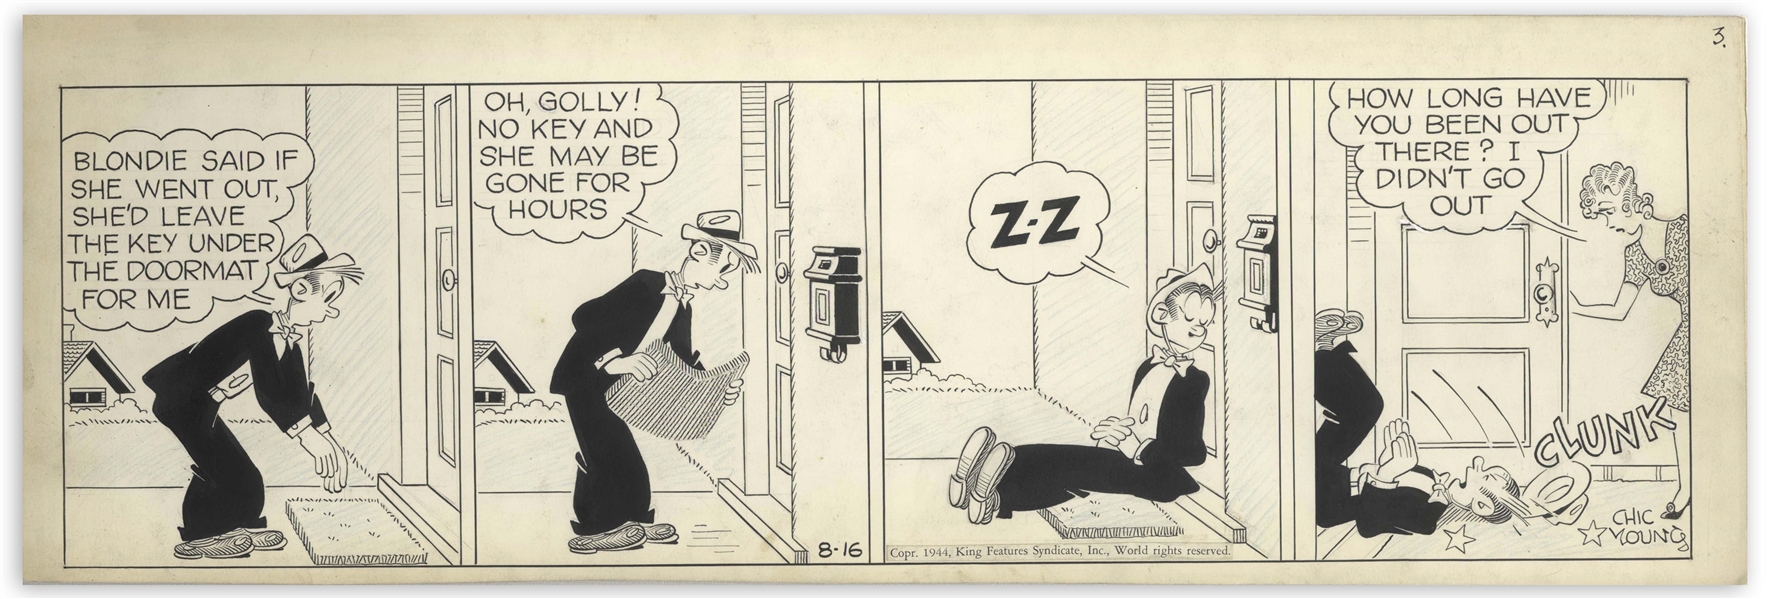 Chic Young Hand-Drawn ''Blondie'' Comic Strip From 1944 Titled ''Open House at the Bumsteads!'' -- A Comedy of Errors Results in a Nice Nap for Dagwood